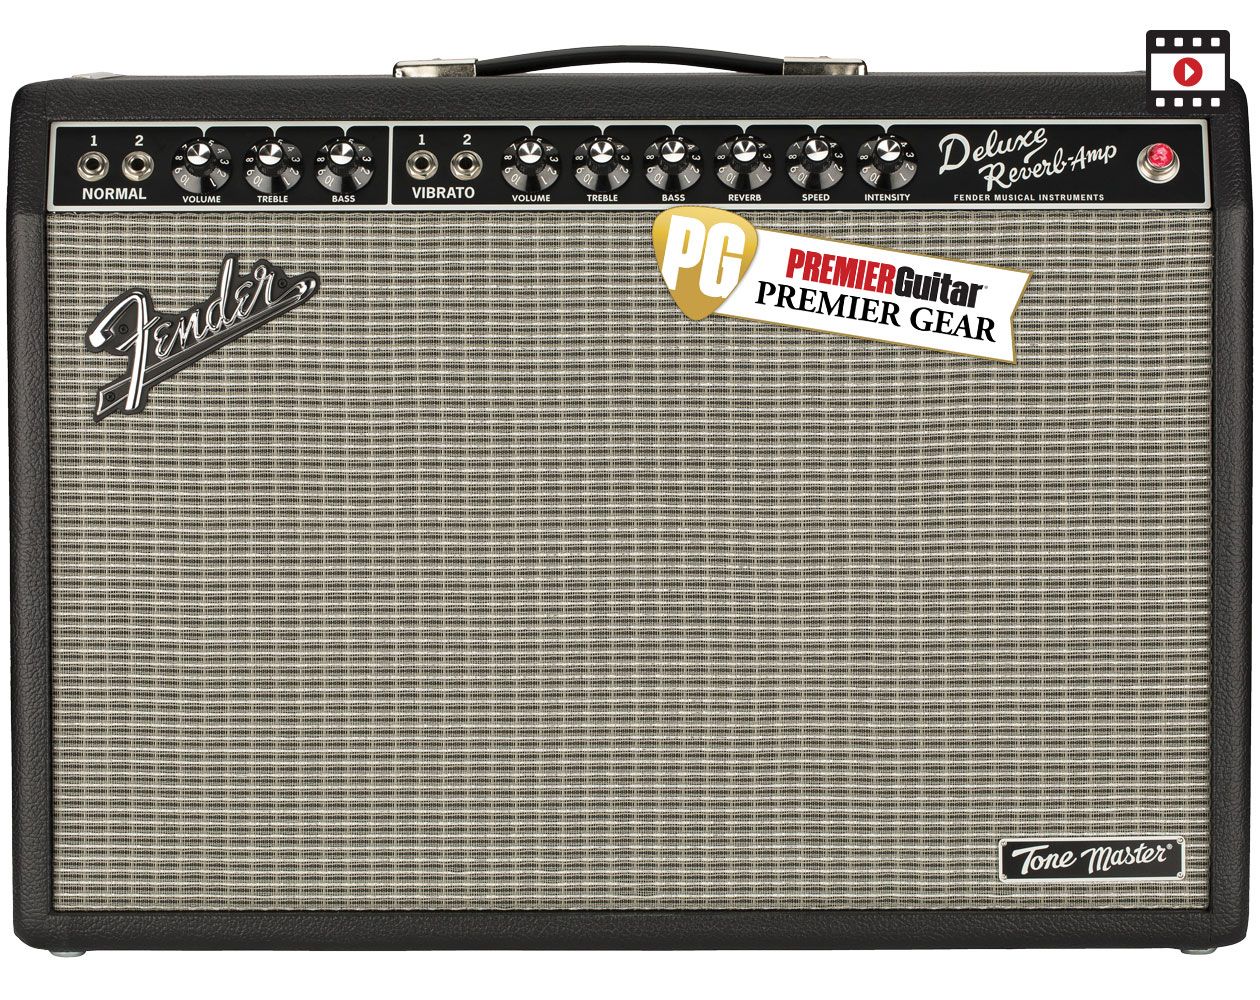 Fender Tone Master Deluxe Reverb Review